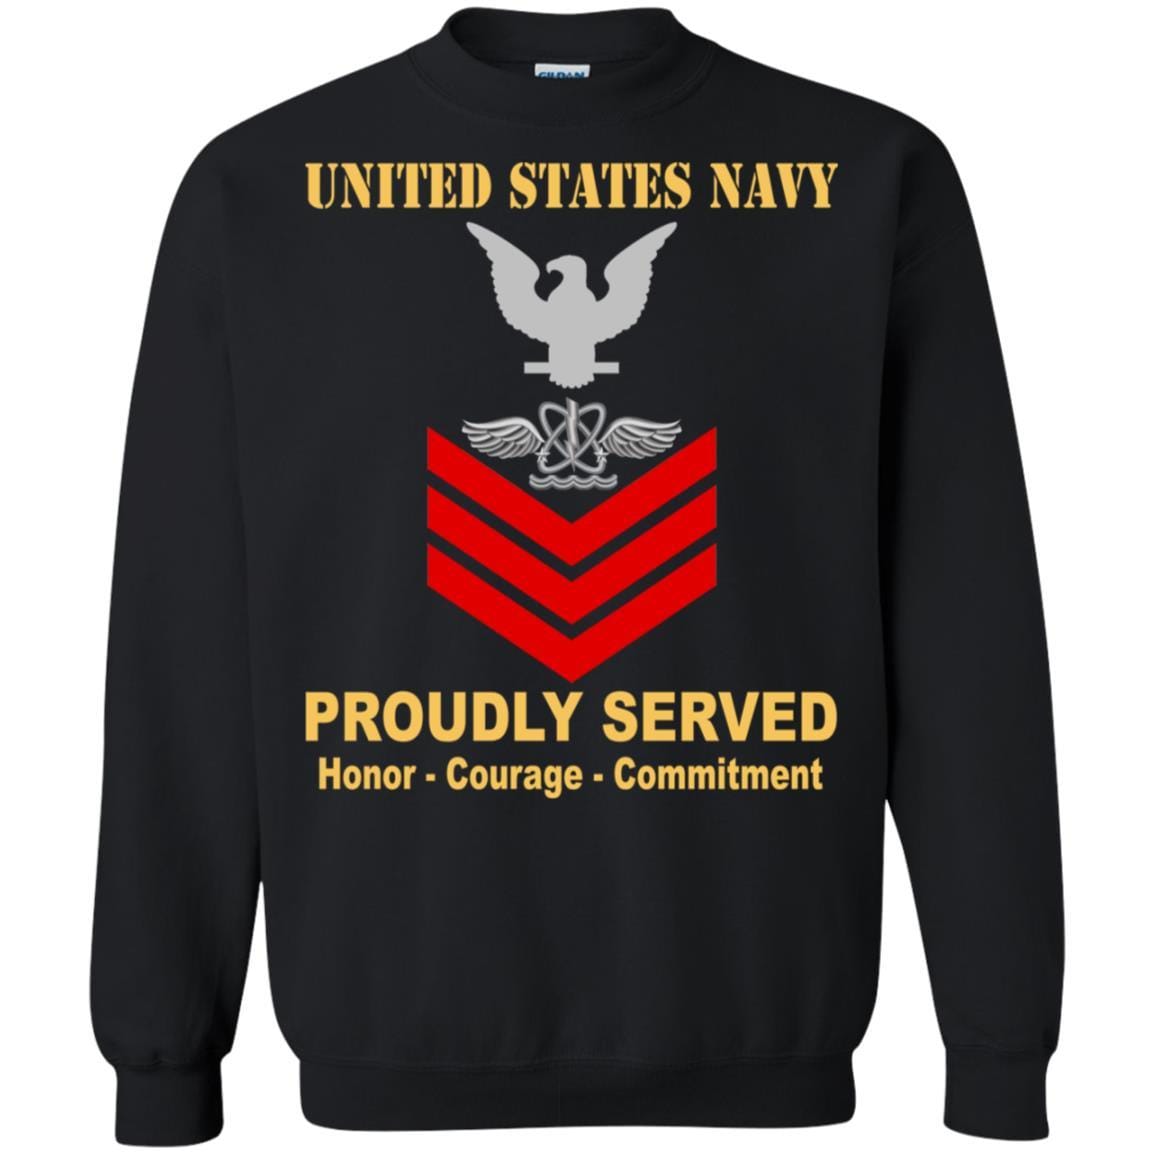 U.S Navy Naval aircrewman Navy AW E-6 Rating Badges Proudly Served T-Shirt For Men On Front-TShirt-Navy-Veterans Nation